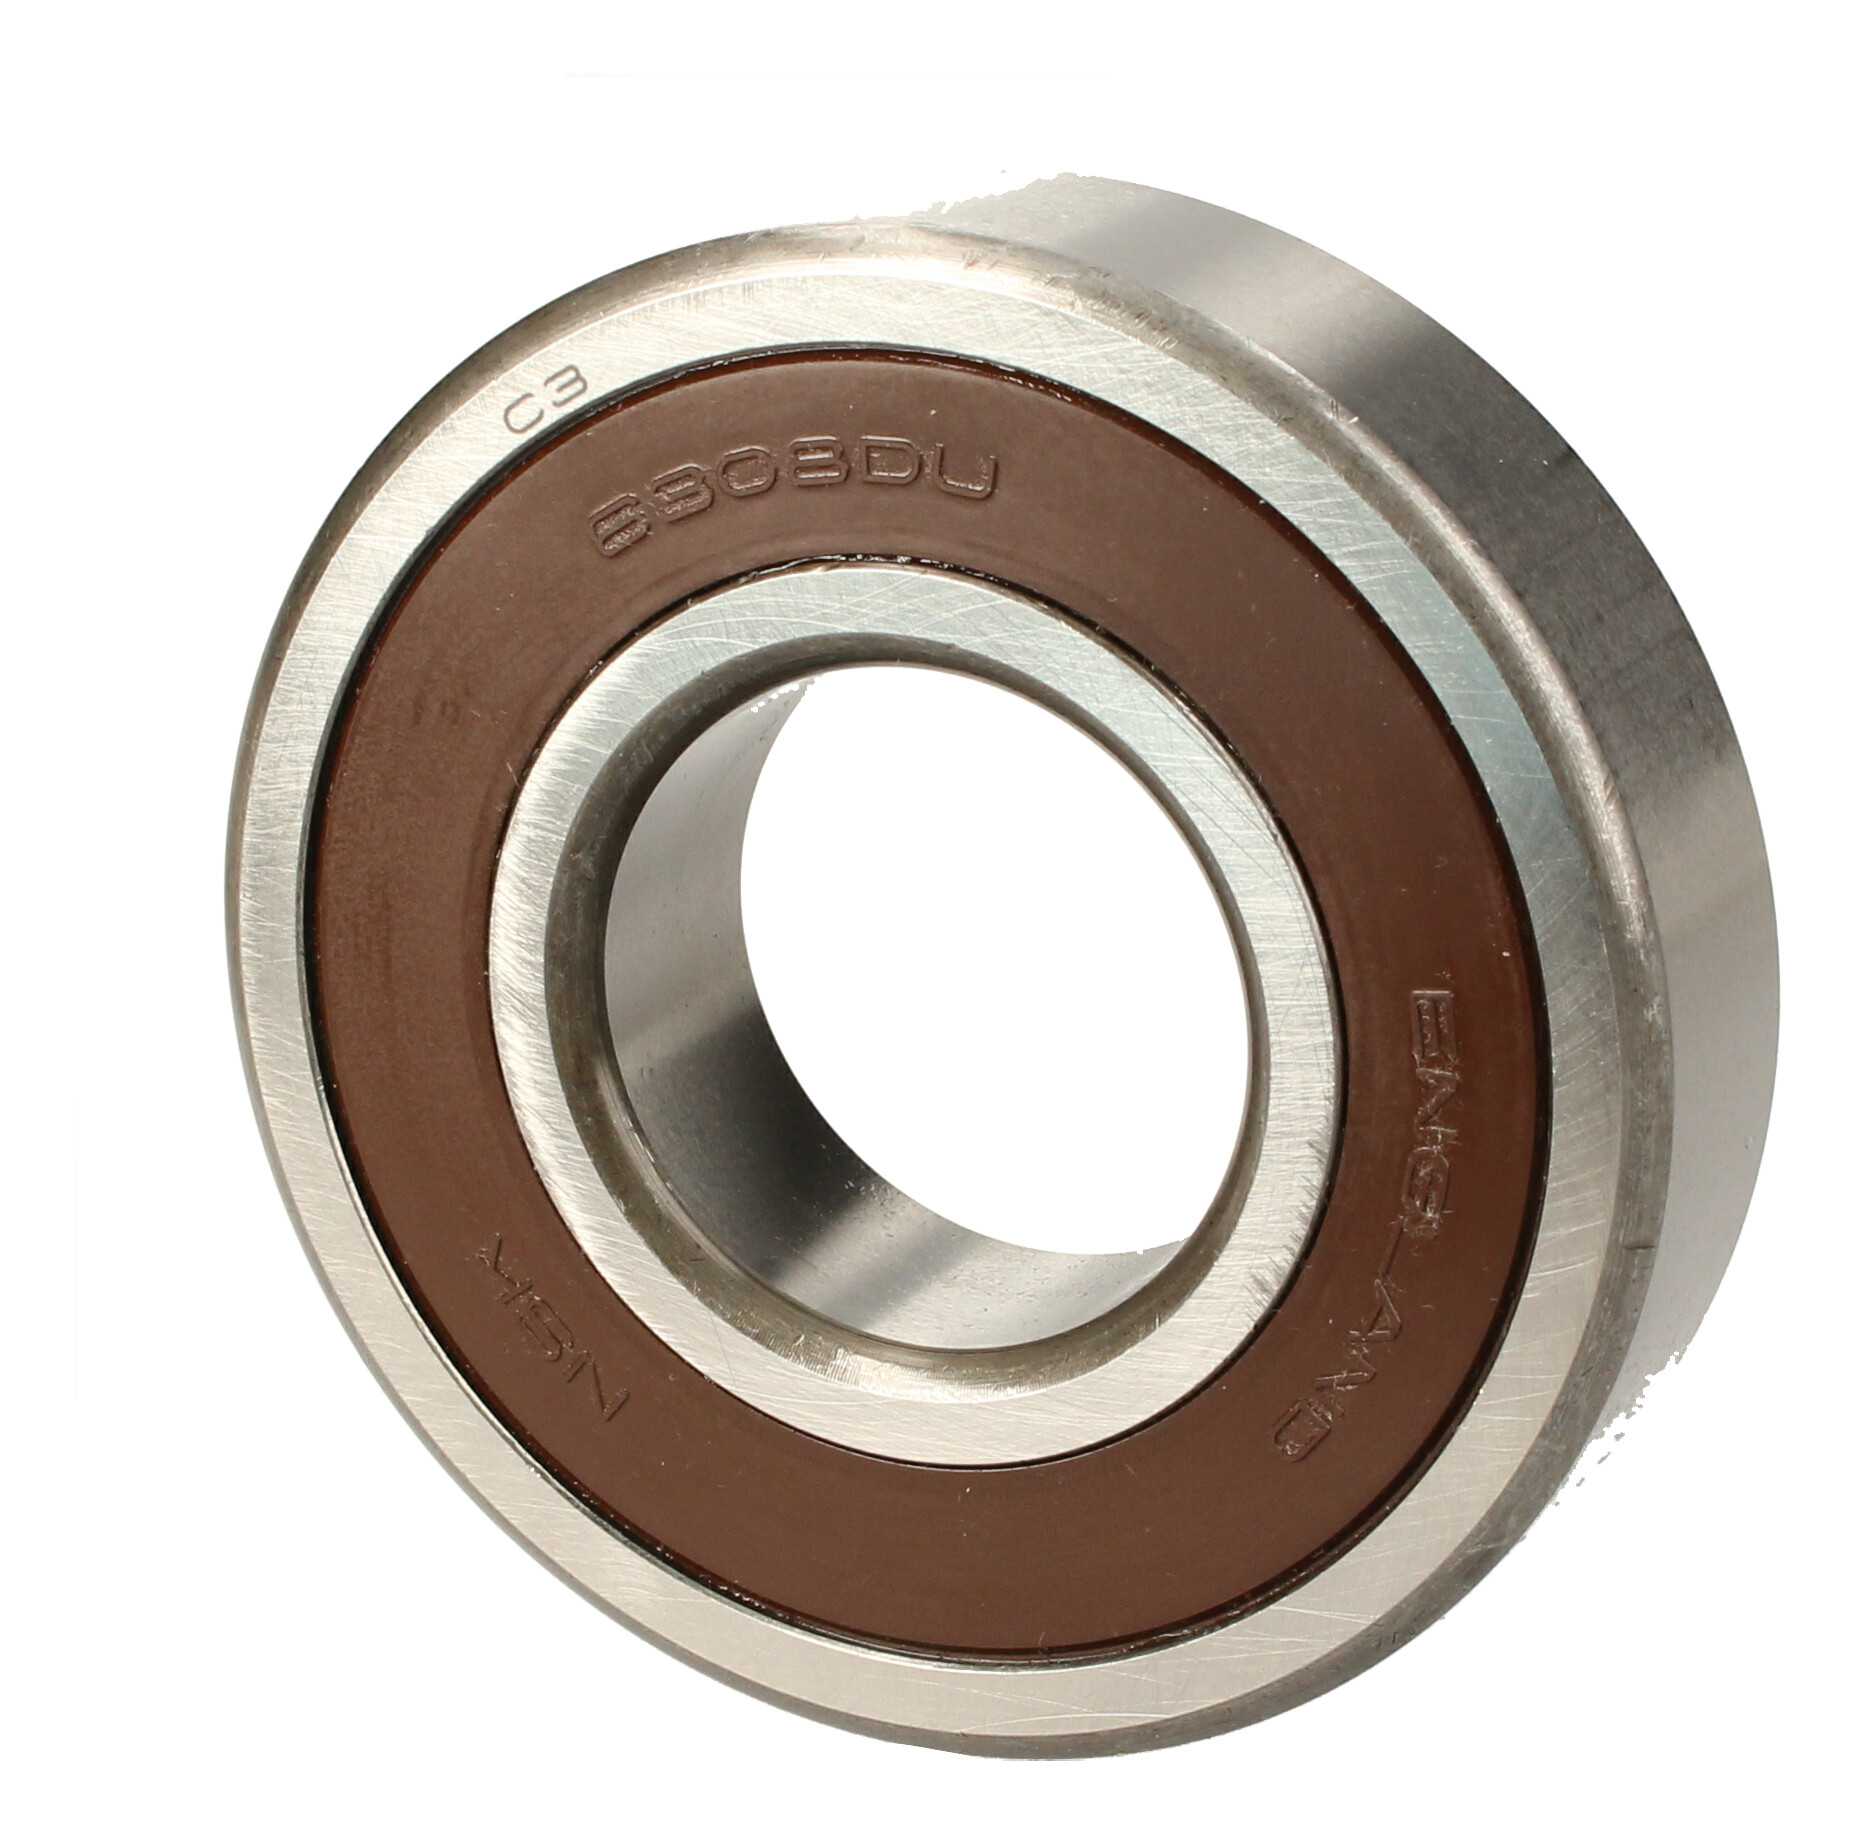 BALL BEARING 6308-NSK (WITHOUT PACKAGING) - Image 1